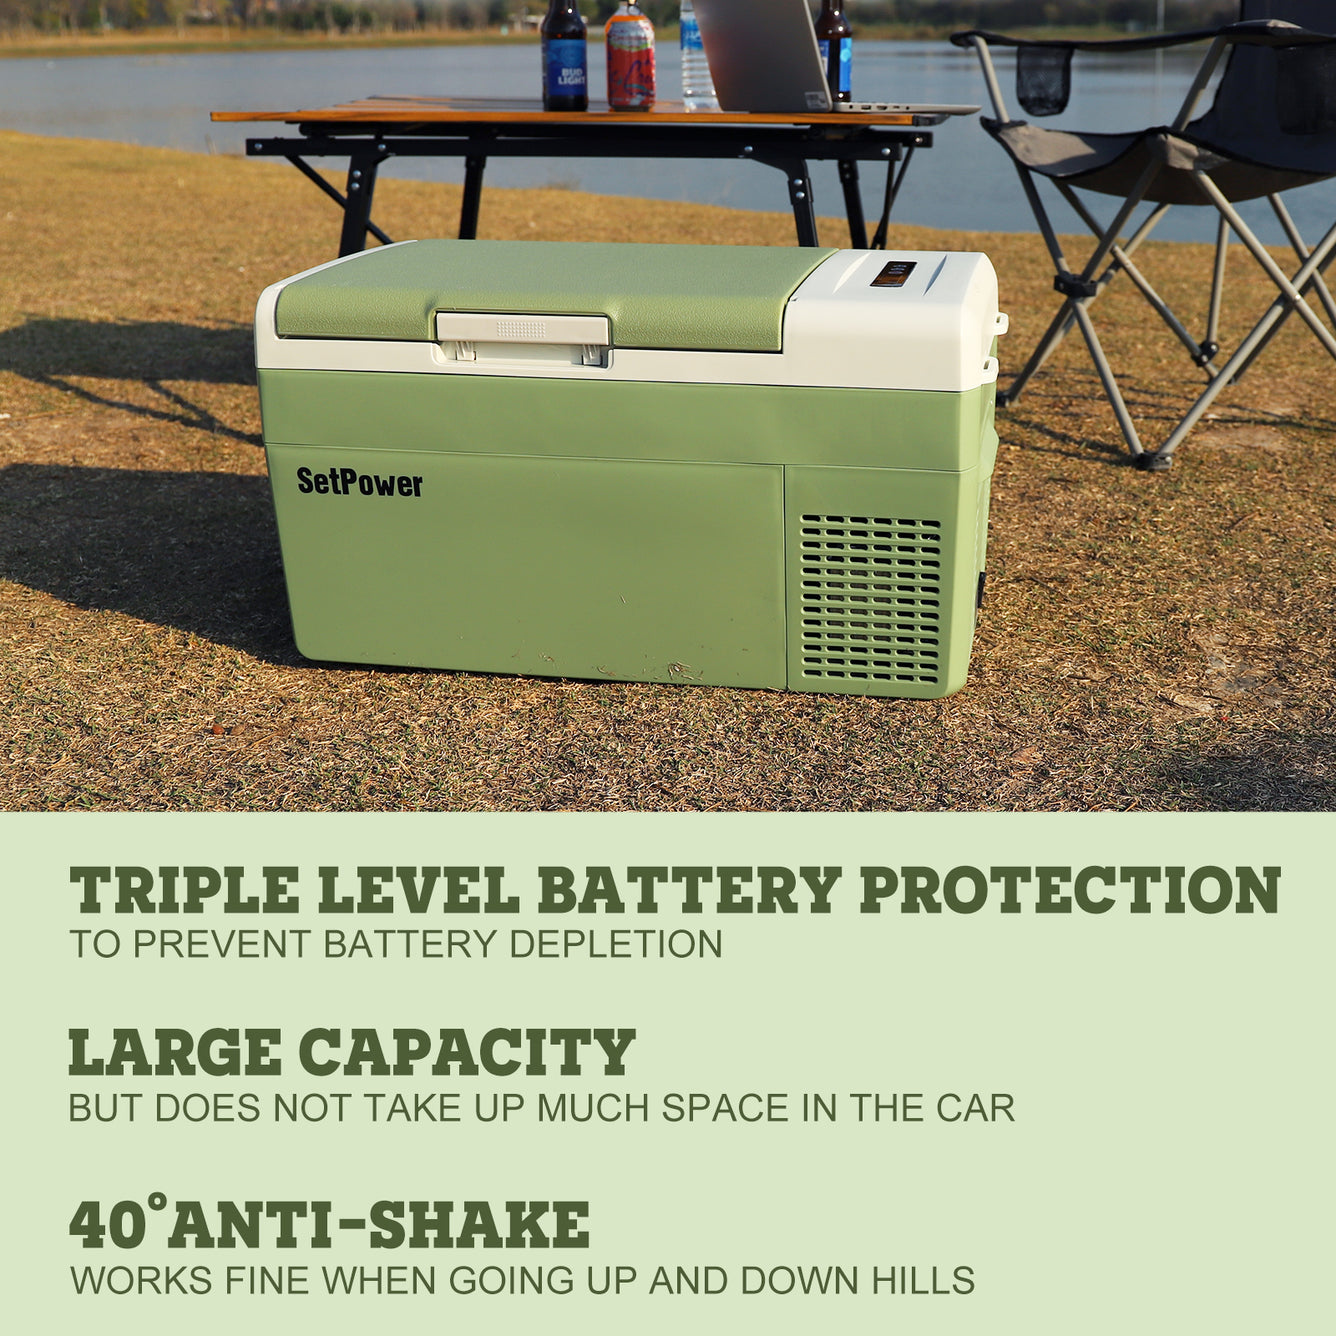 Setpower 12 Volt Refrigerator, 12.7Liter (13.5qt) Portable Freezer Fridge, Small size but large capacity, best price for this FC15, Car refrigerator with 12/24V DC & 110-240V AC, Electric Compressor Cooler for Camping, overlanding, van life and outdoor life.  Our fridges provide 3-year warranty on compressor.